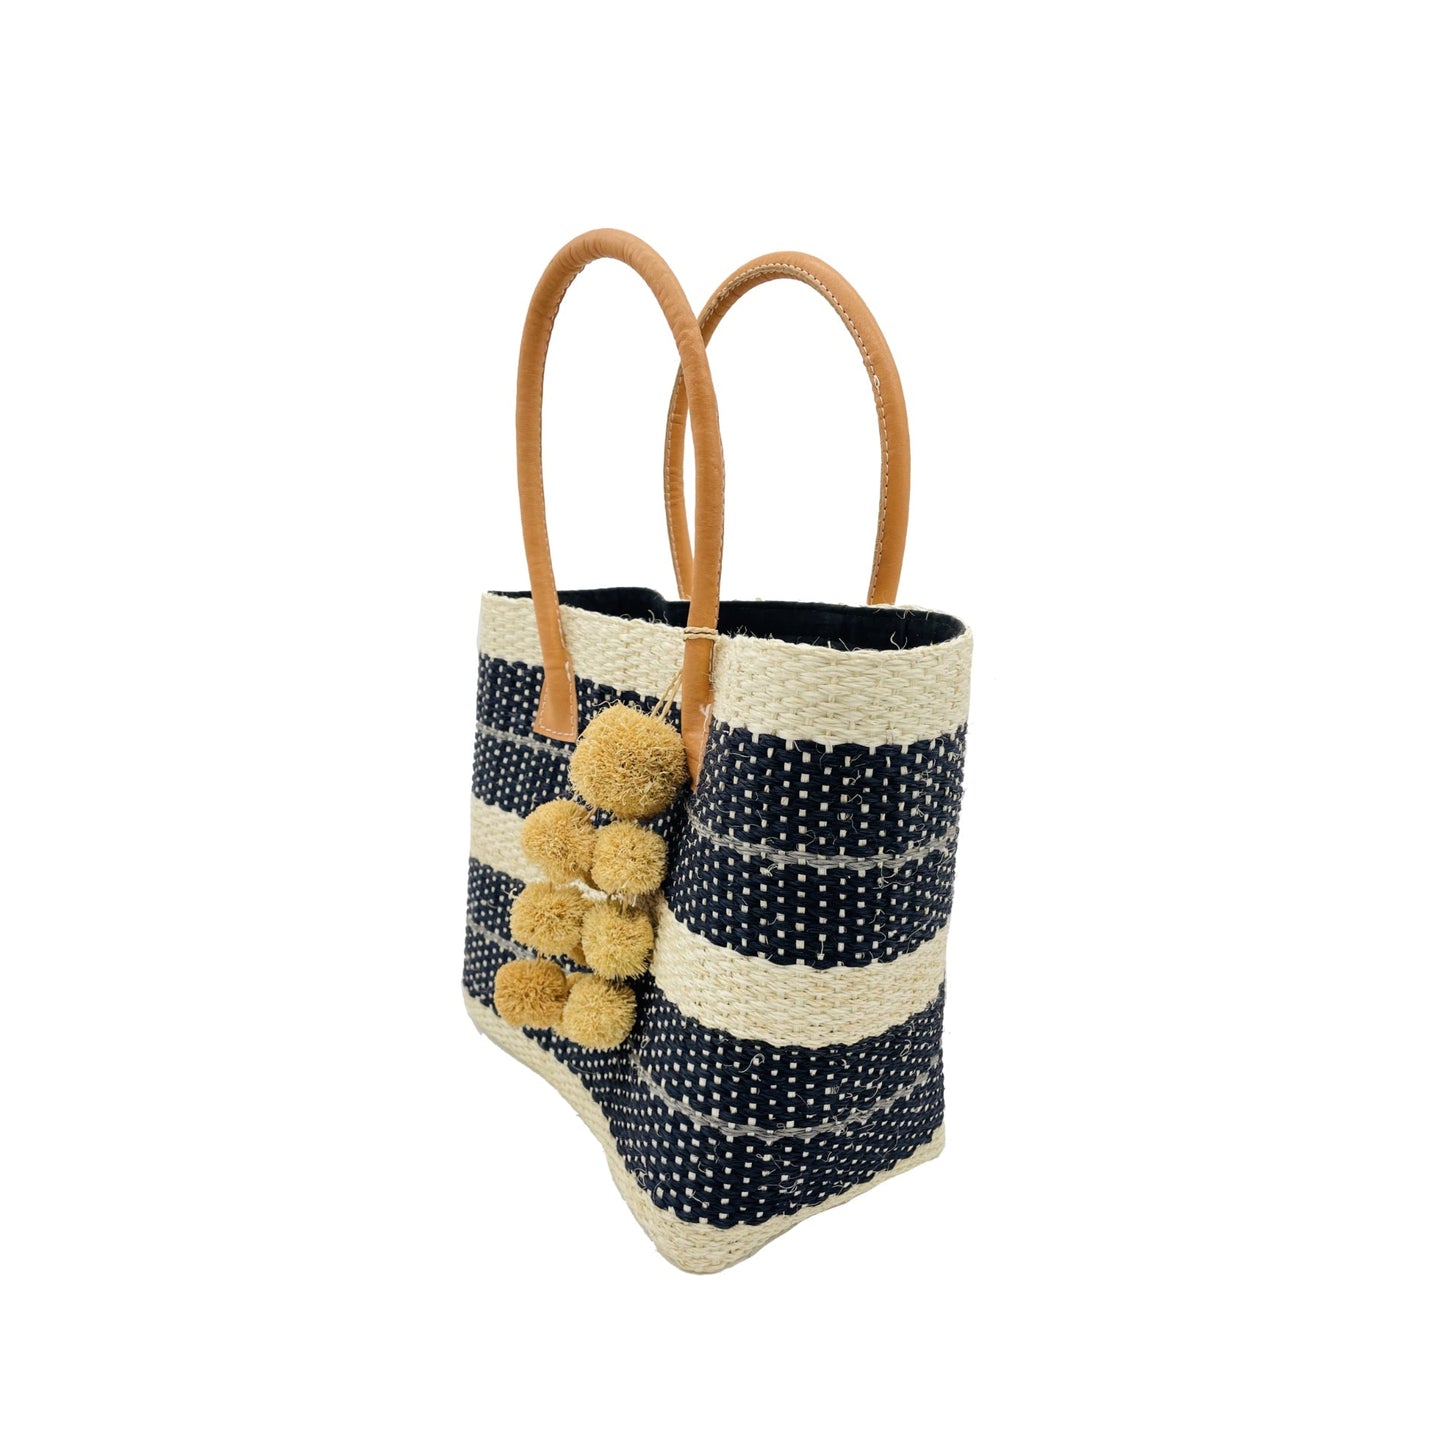 Imperial Straw Basket - The Riviera Towel Company